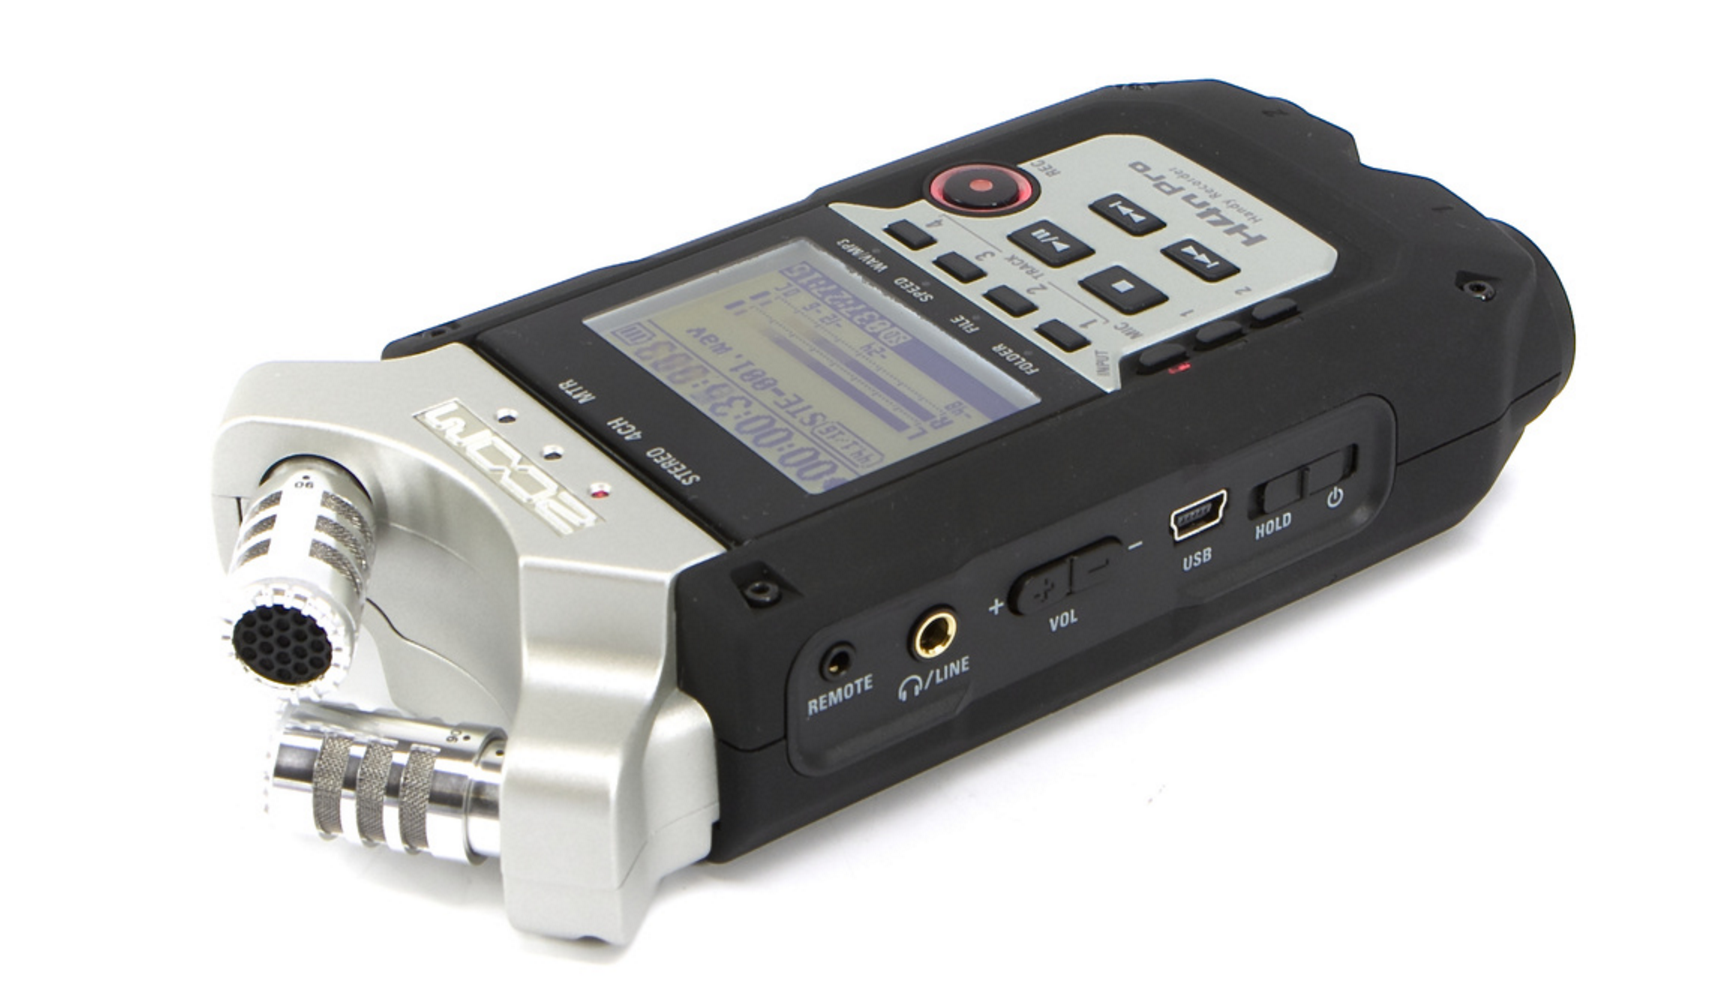 Zoom H4n is more than simply an audio